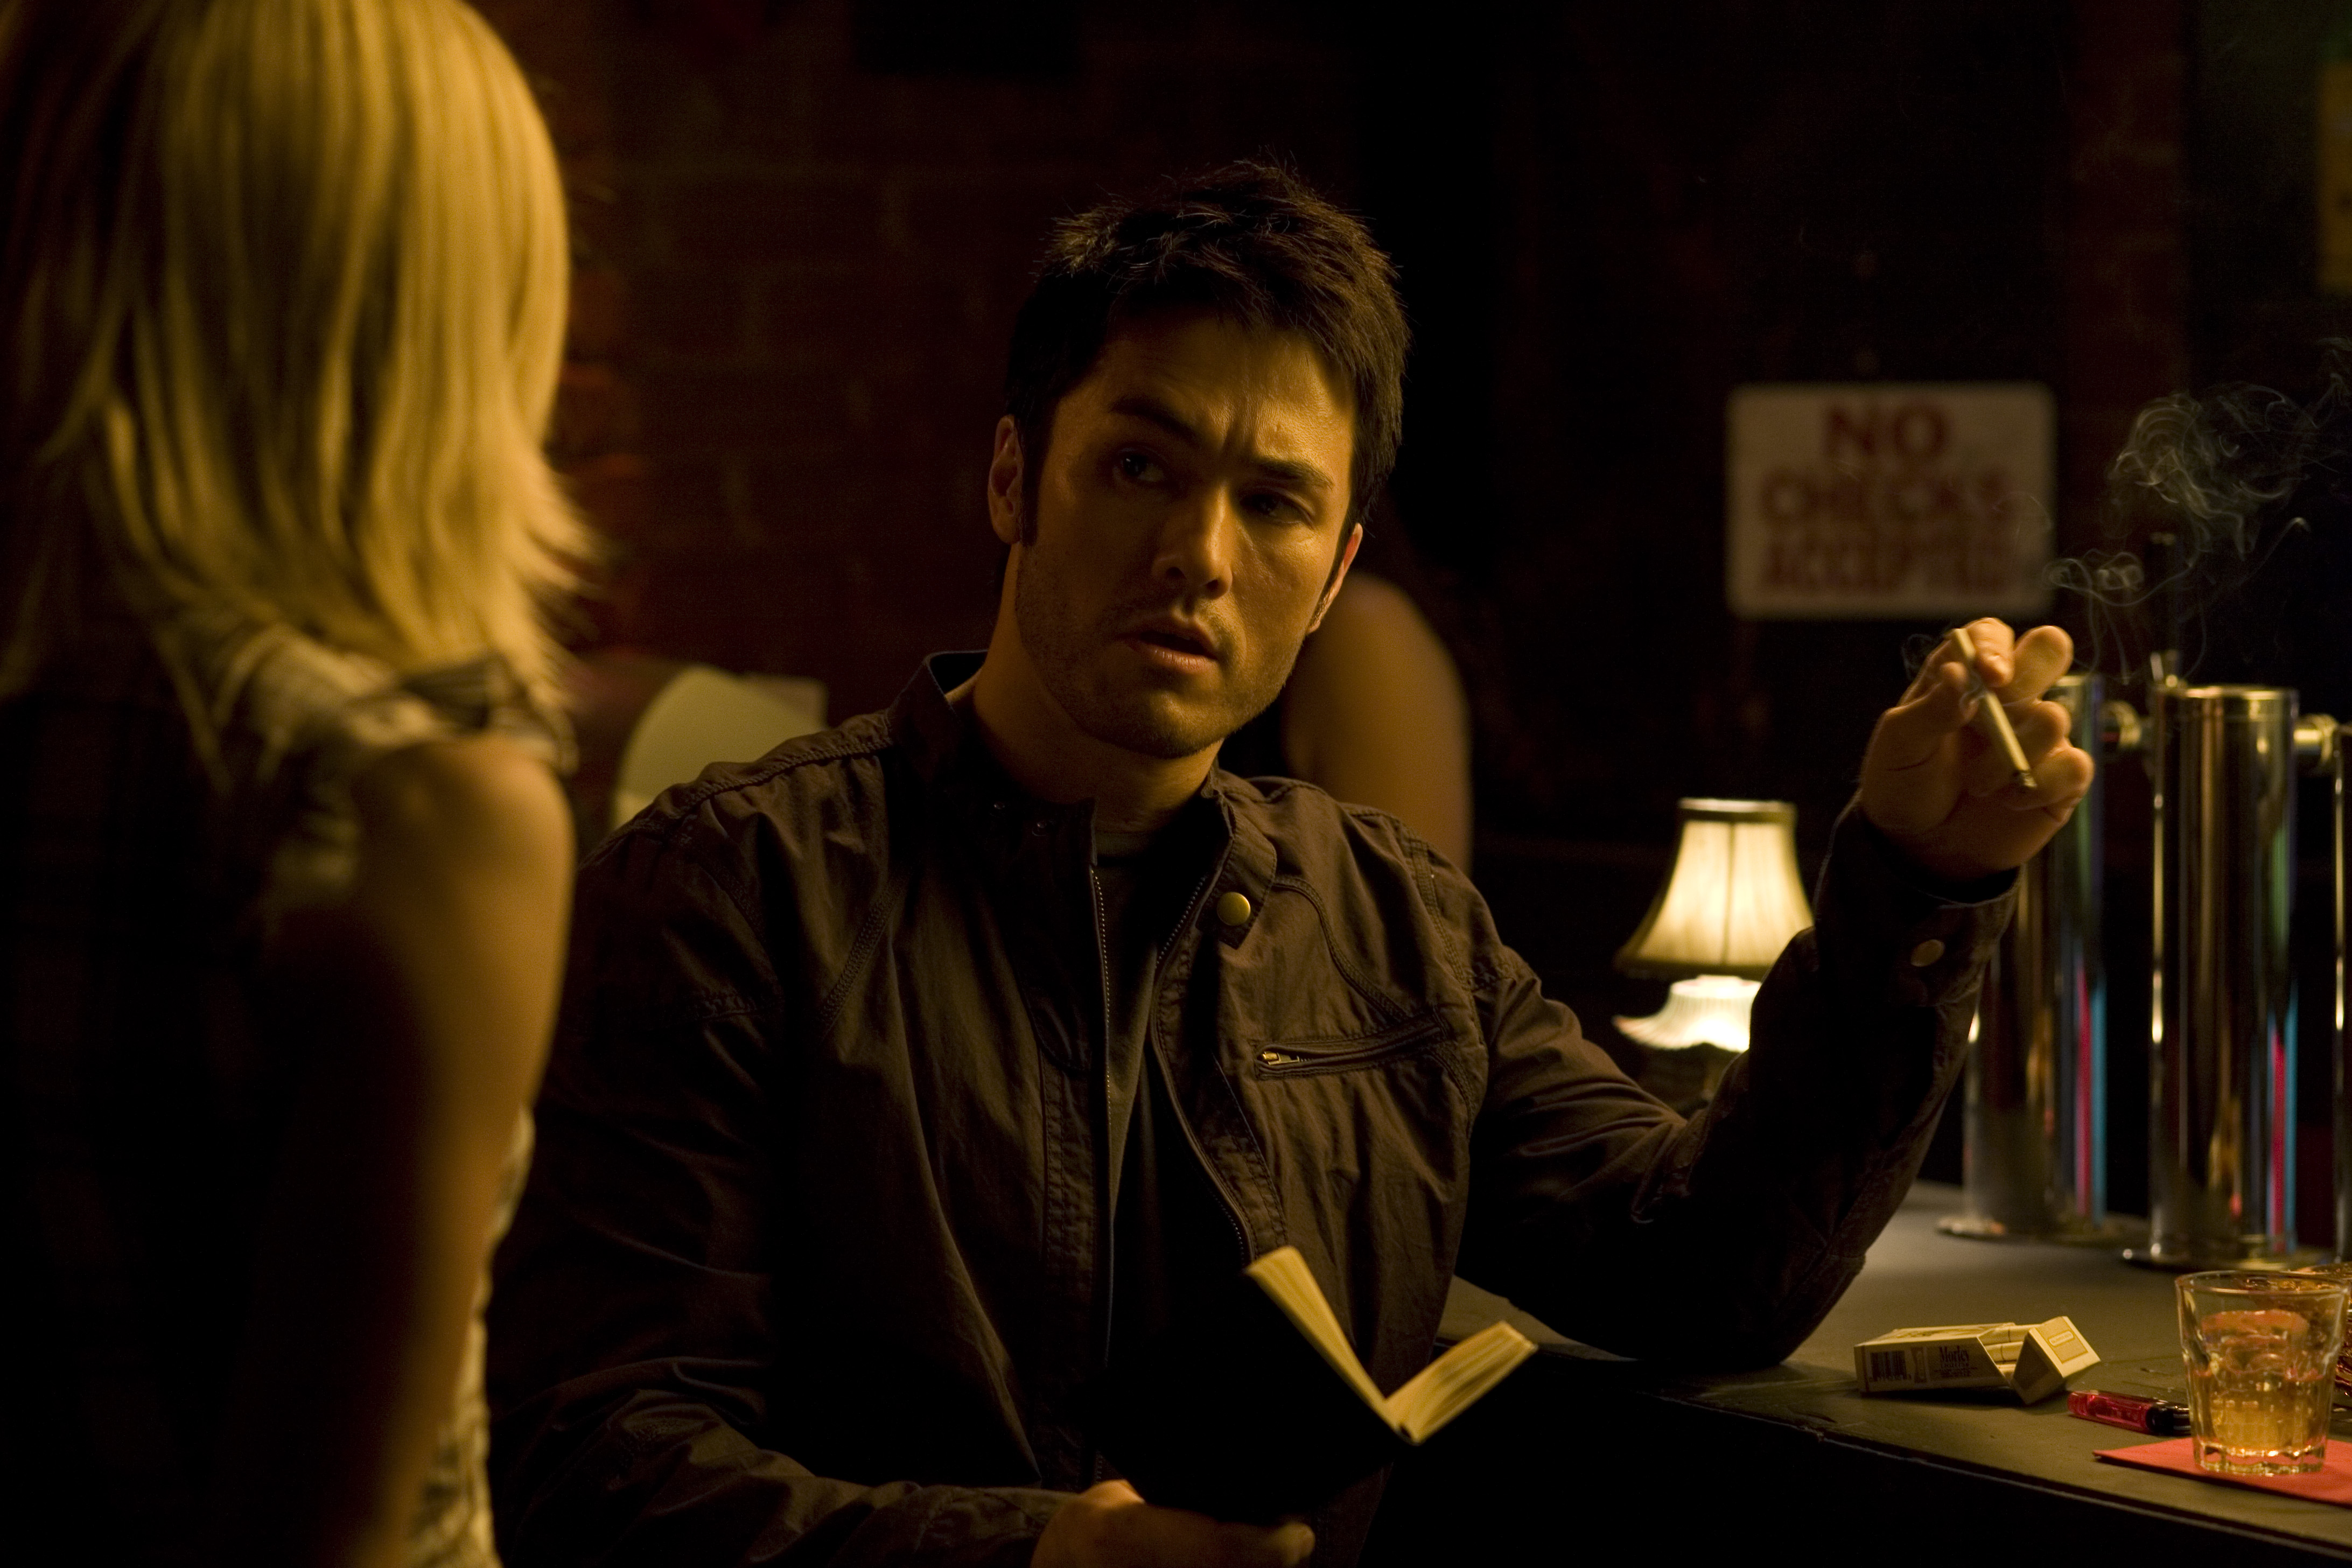 Jason Yee as 'Jake' with Dominique Swain in a scene from 'The Girl From The Naked Eye'.